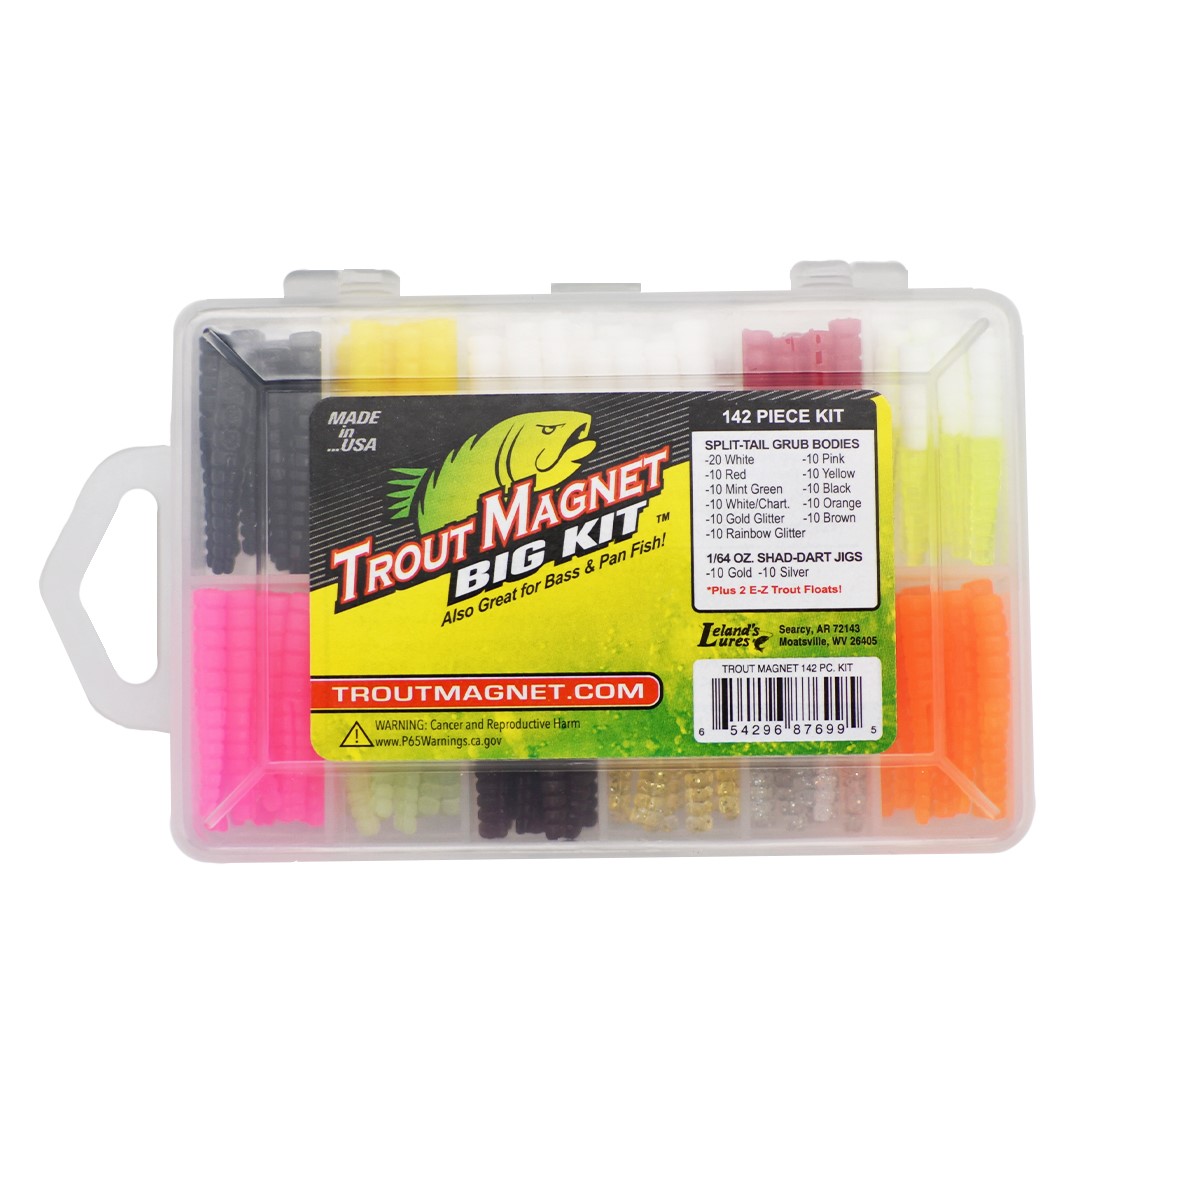  Trout Magnet Trout Slayer 28 Piece Fishing Kit, Includes 20  Crawdad Bodies and 8 Size 6 Long Shank Hooks, Great for Small Streams and  Lakes, Catches All Species, White 